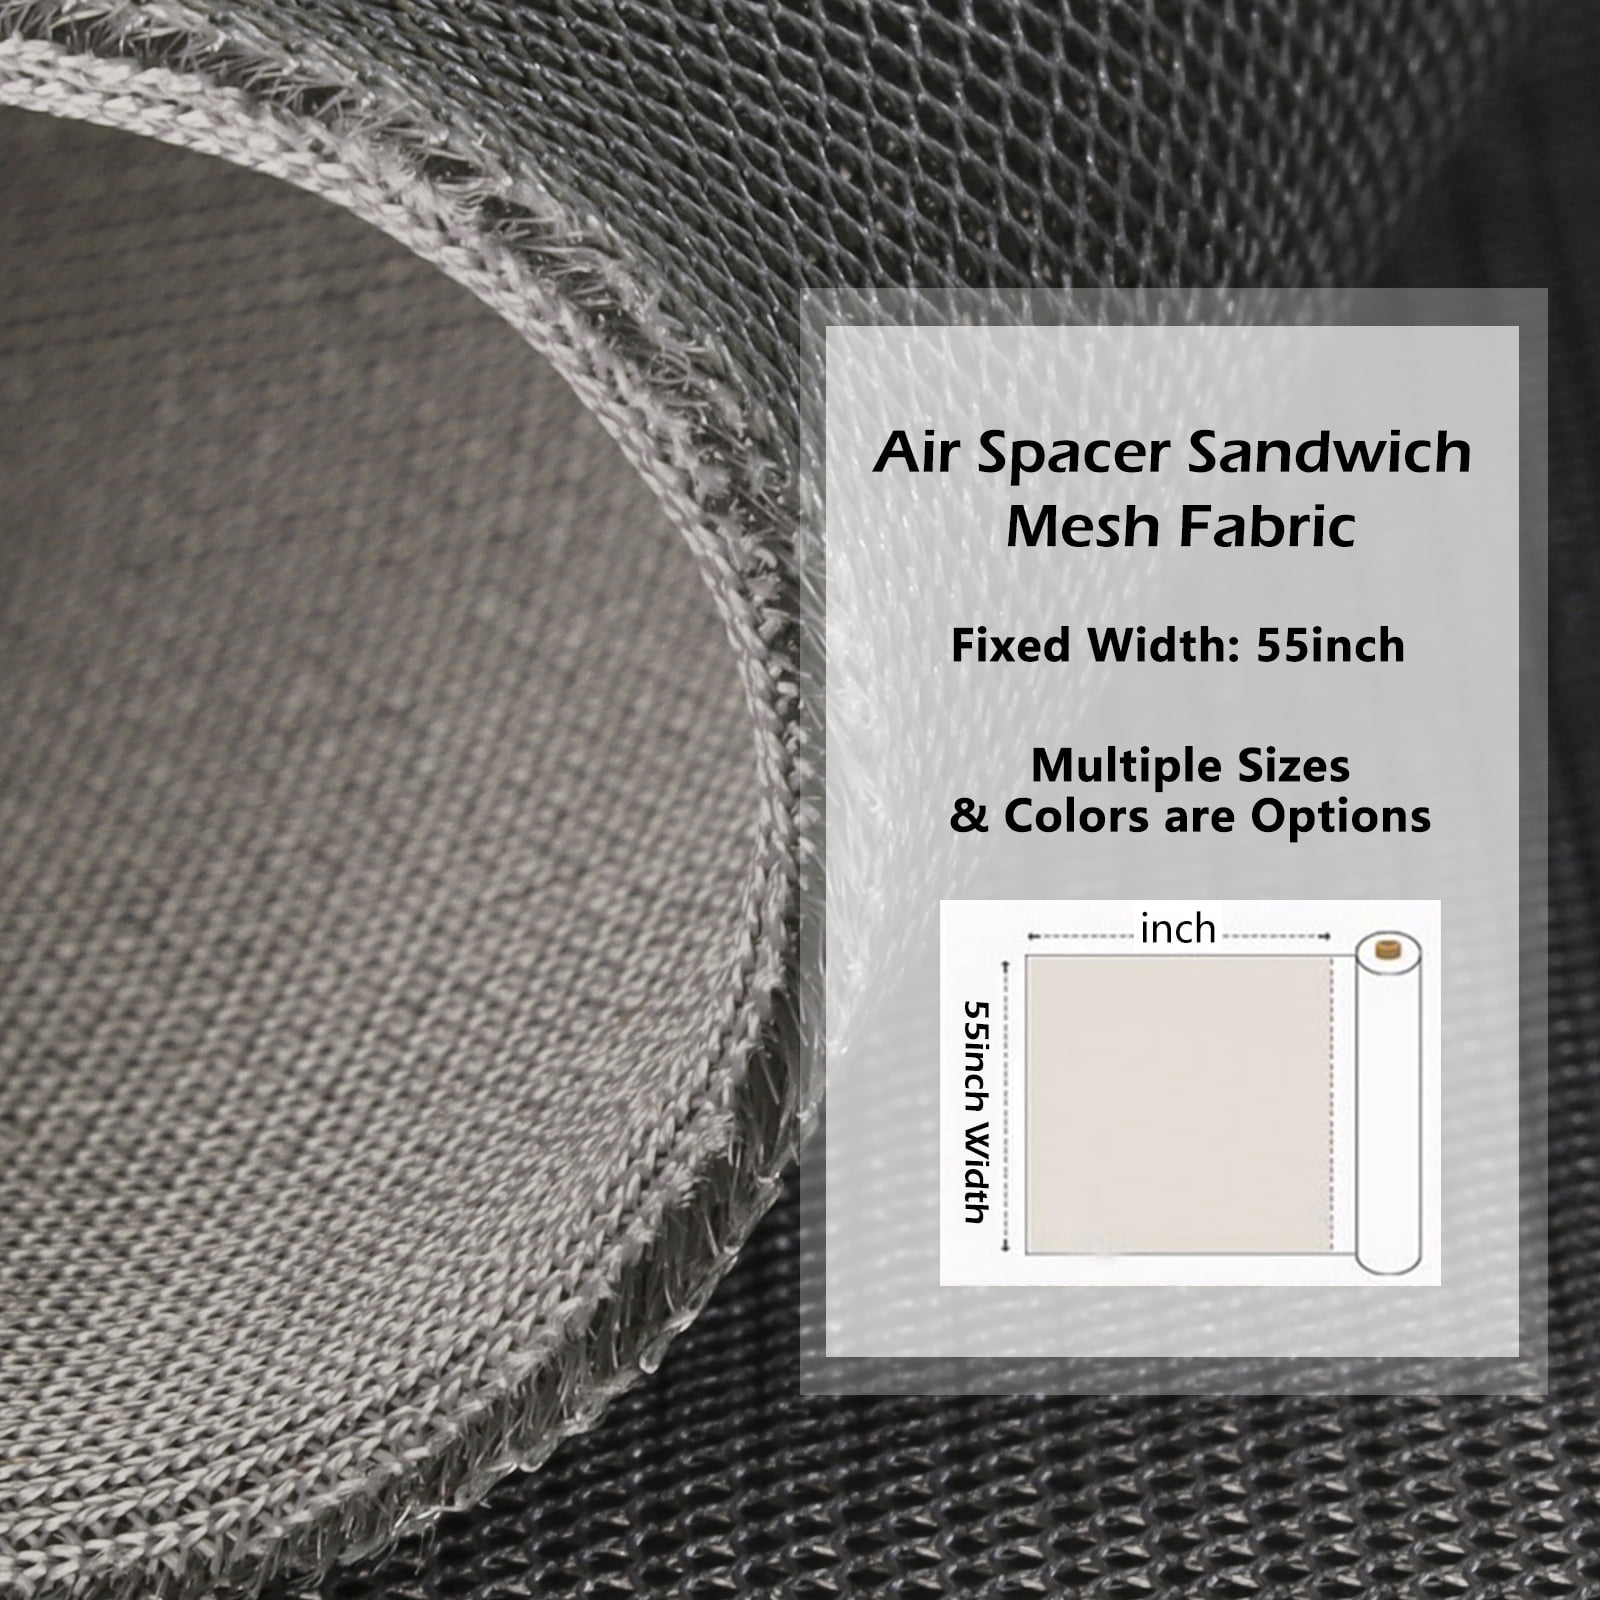  Breathable 3D Air Mesh Fabric,Light 3 Layers Sandwich Spacer Mesh  Fabric, Apply to DIY Craft,Upholstery,Home Applications,  Chair,Bags,Clothes,Shoes, Lining, 1yard/36x56,Sold by The Yard (Gray) :  Arts, Crafts & Sewing